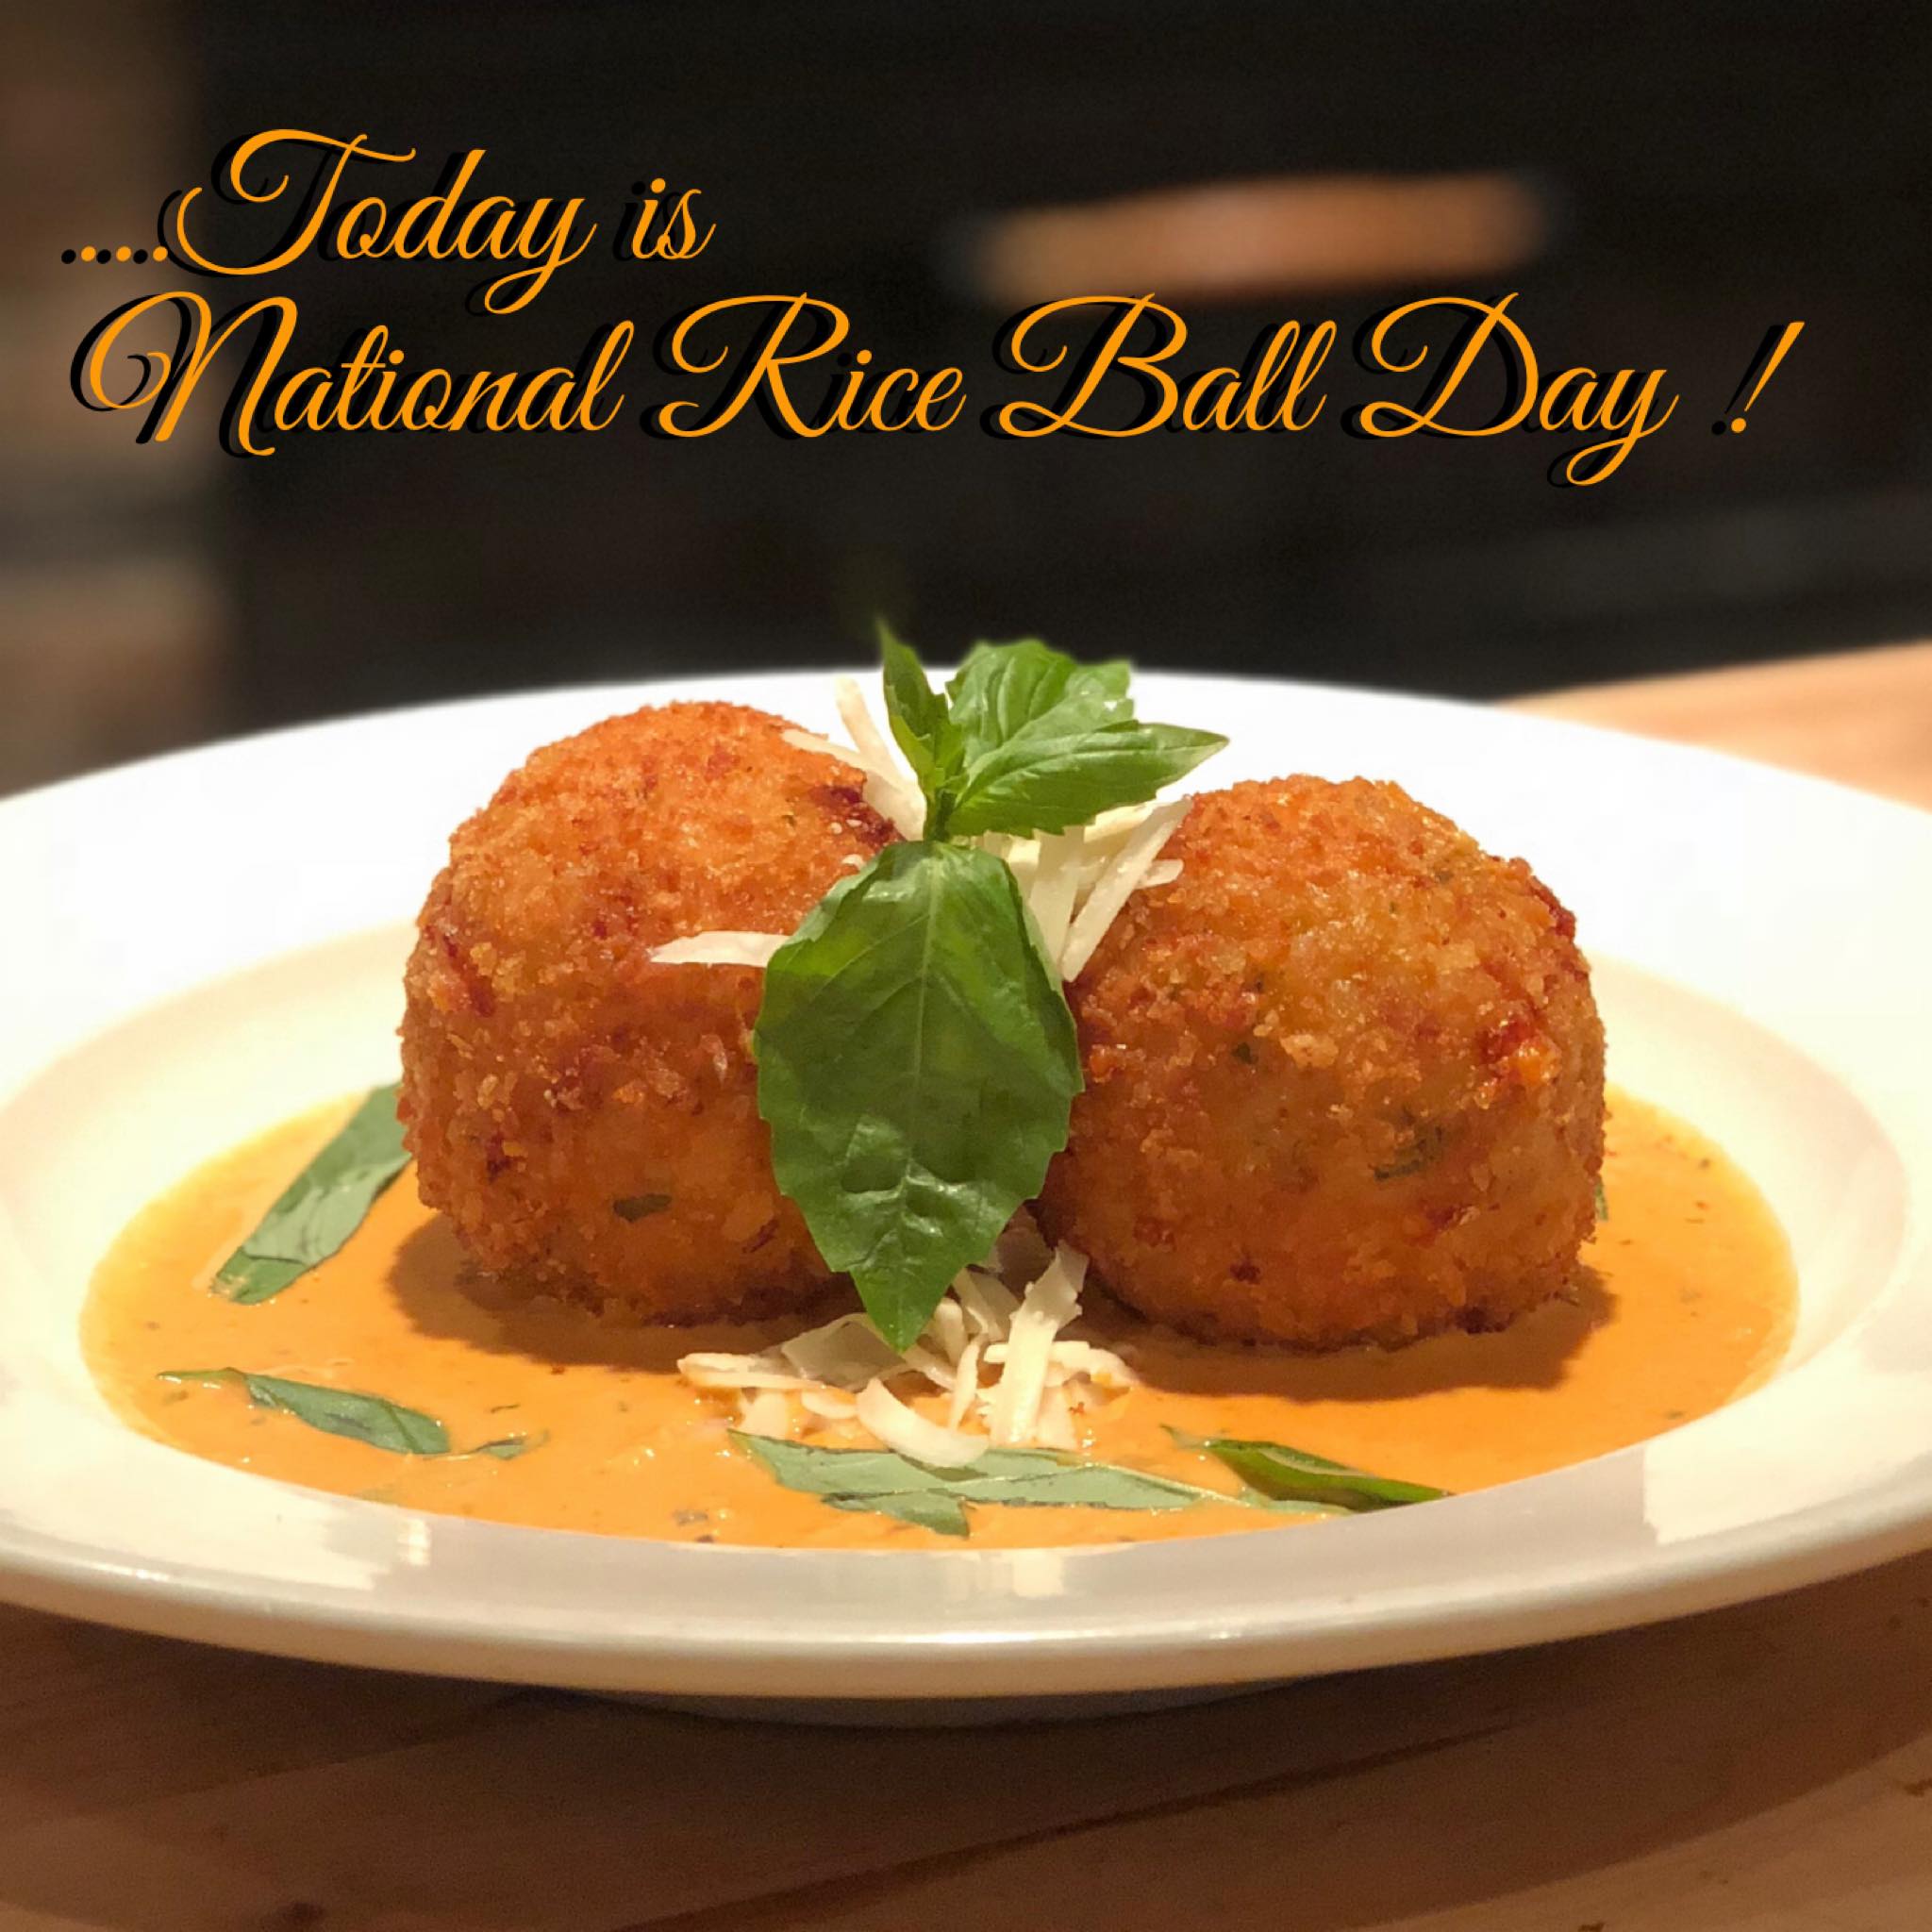 National Rice Ball Day